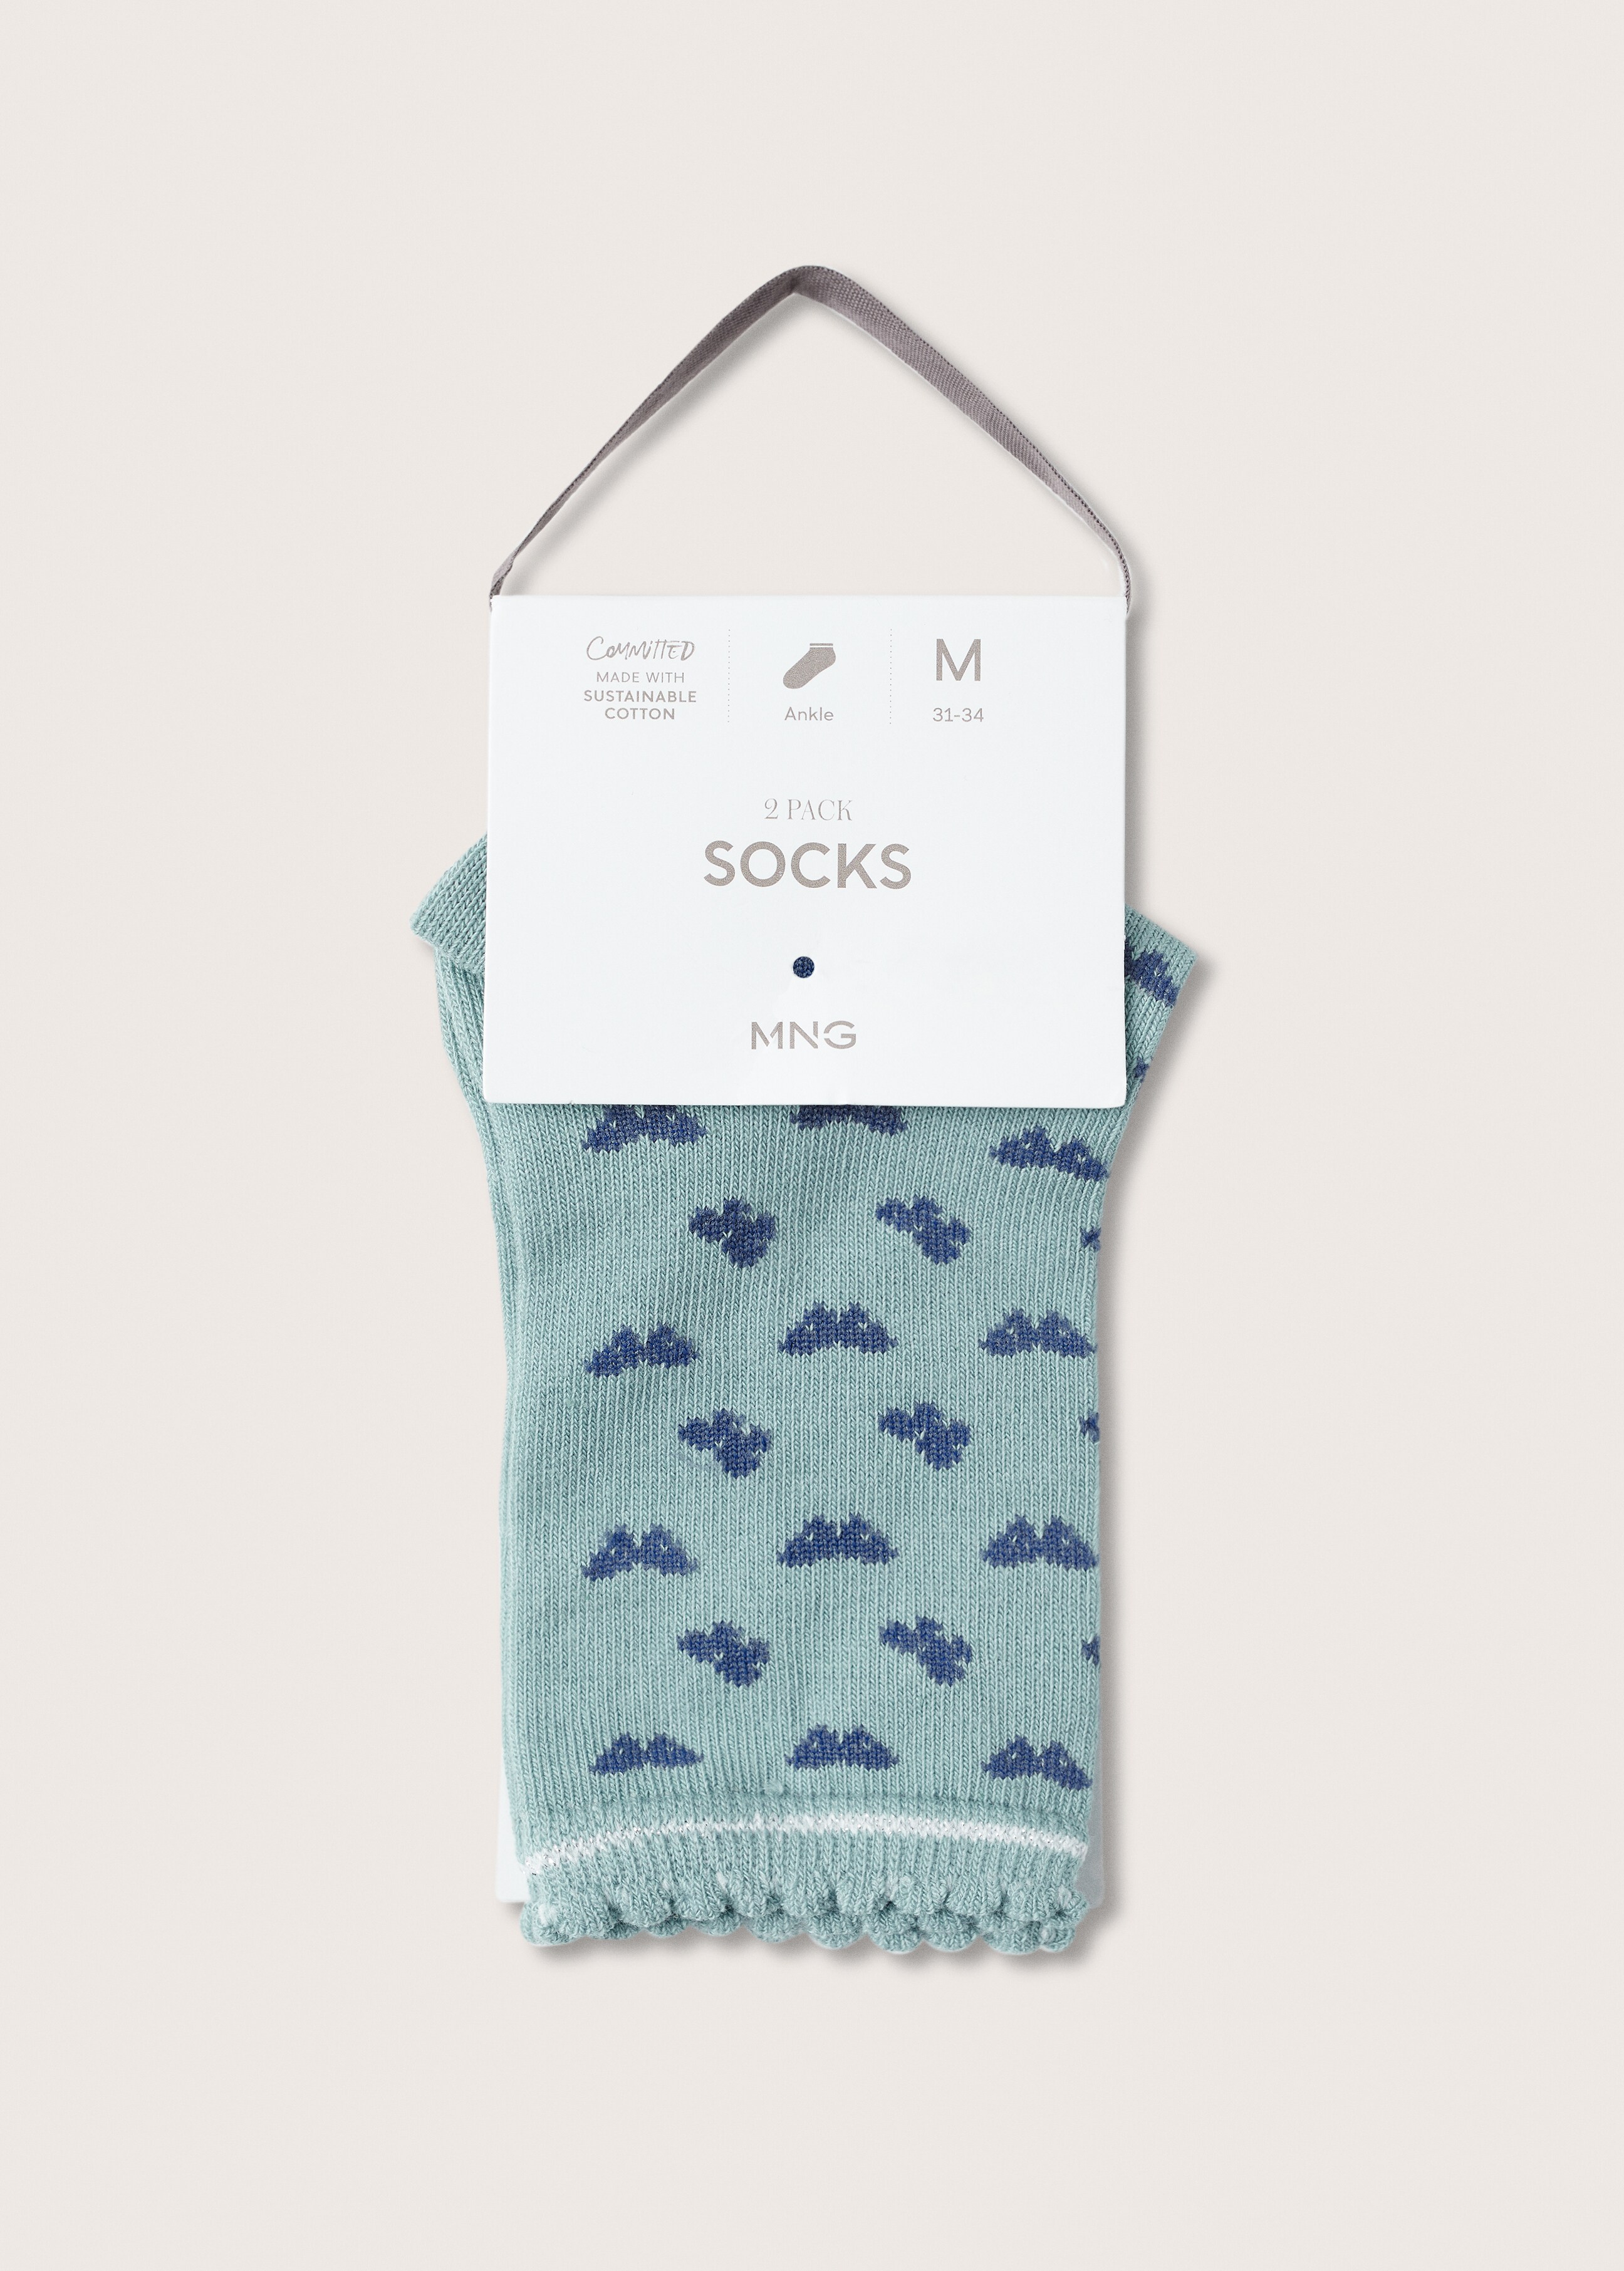 2 pack mixed socks - Details of the article 9